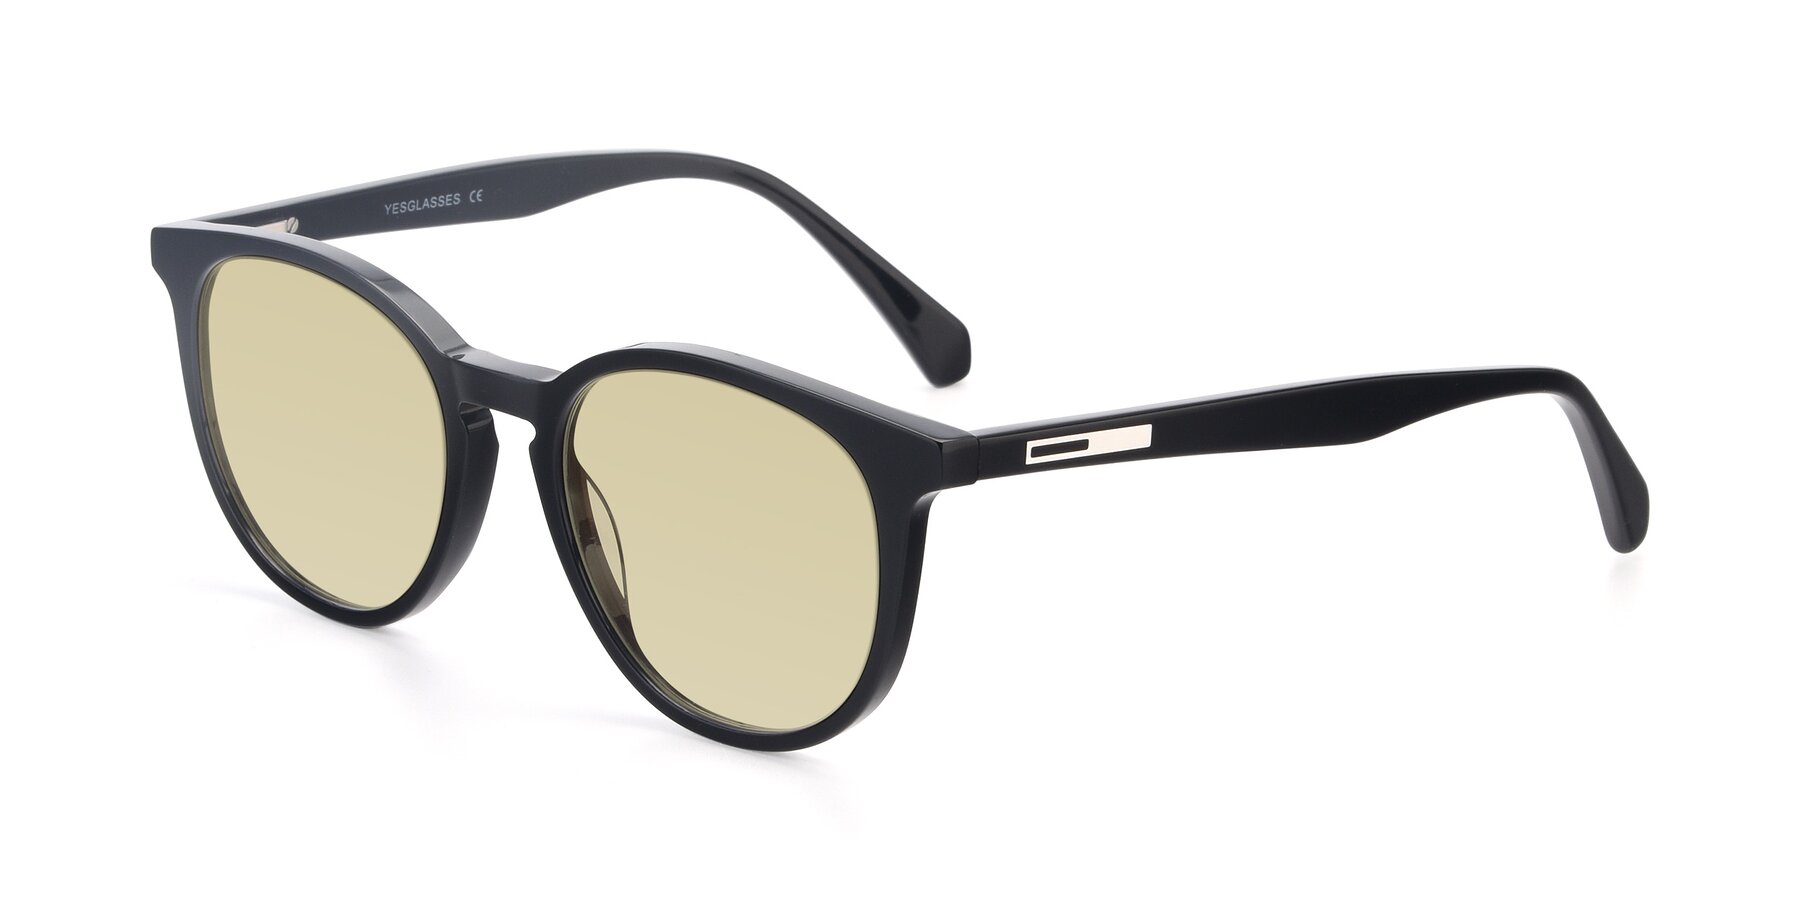 Angle of 17721 in Black with Light Champagne Tinted Lenses